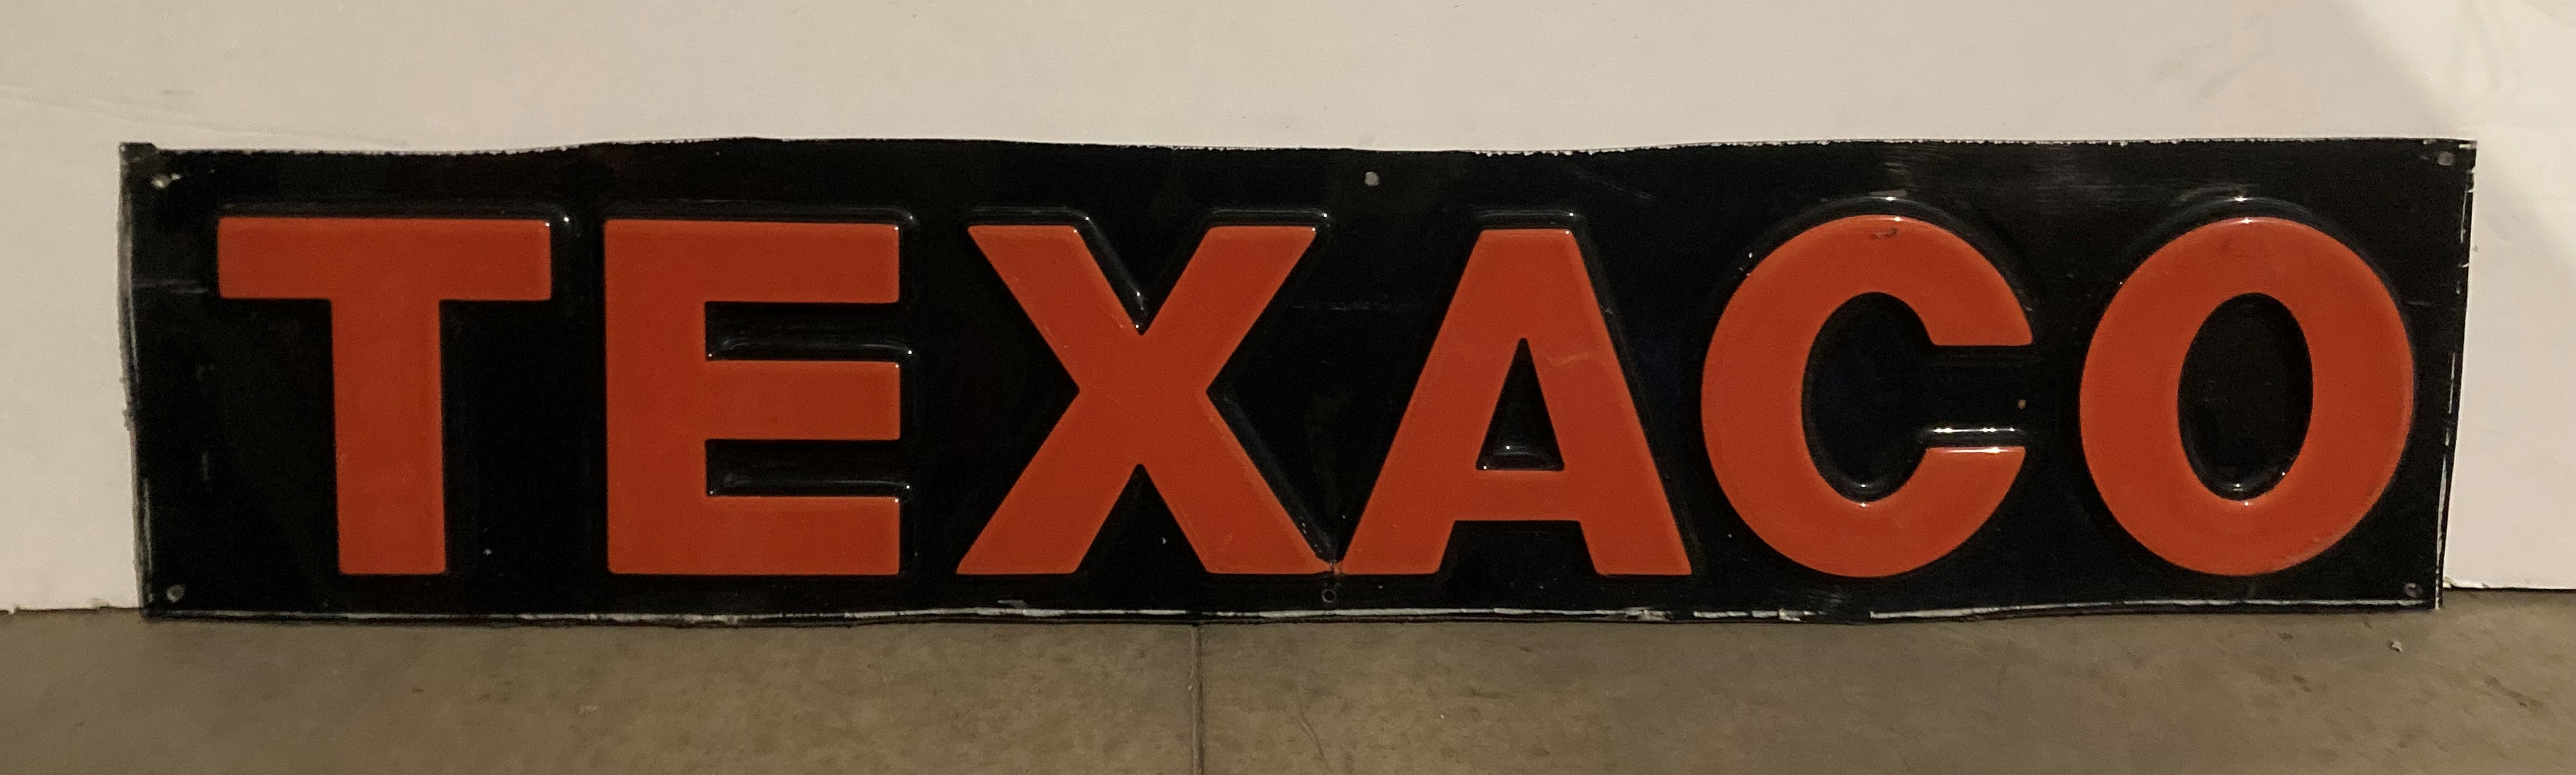 Perspex 'Texaco' black and red fuel sign - size 136 x 28cm (saleroom location: MA1 wall) - Image 2 of 2